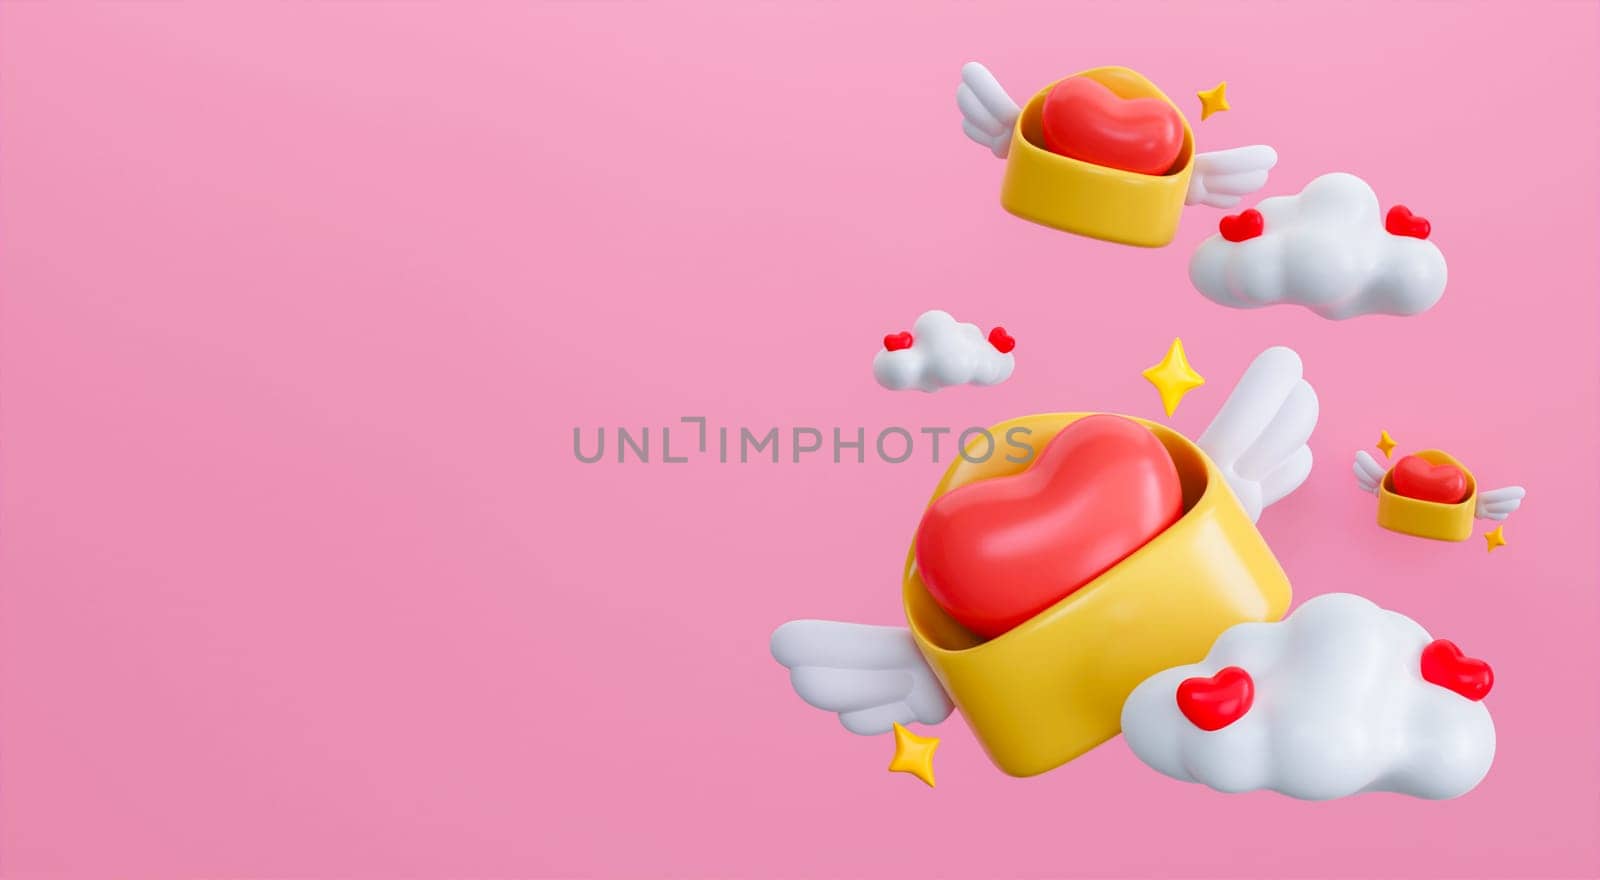 Yellow envelope with wings and red heart. Be my Valentine. Happy Valentine's Day banner copy space for text. 3D rendering illustration.